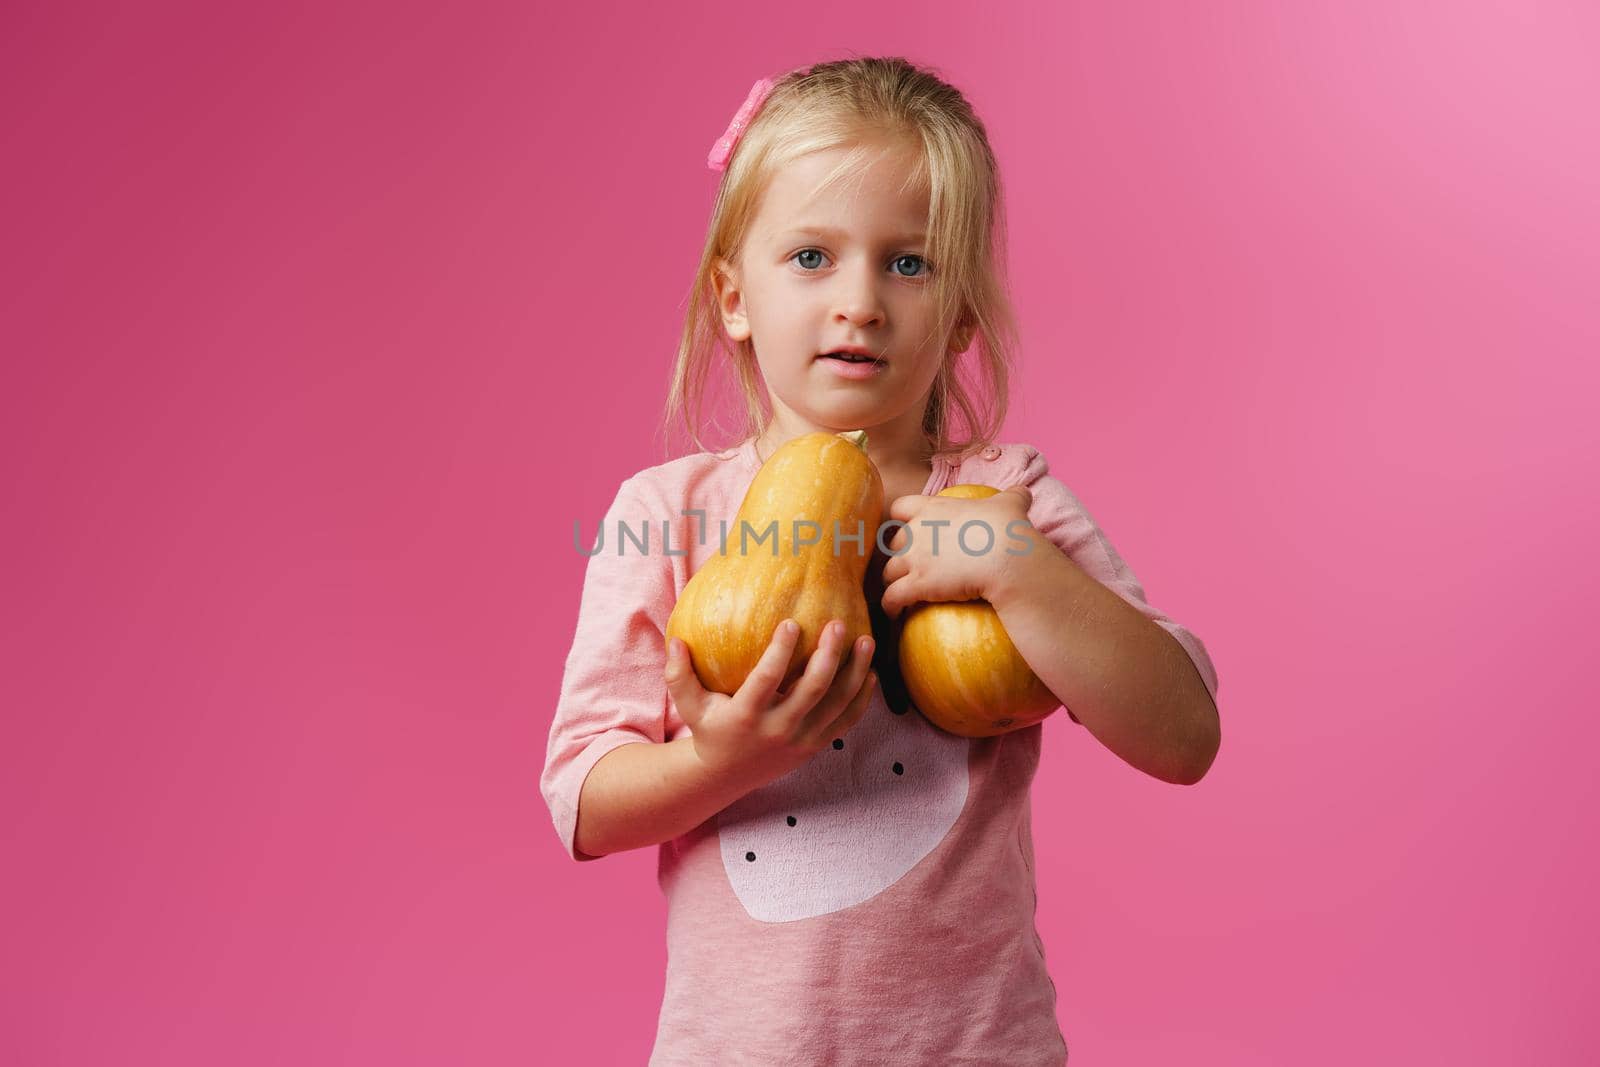 Little girl holding pumpkin in her hands against pink background by Fabrikasimf